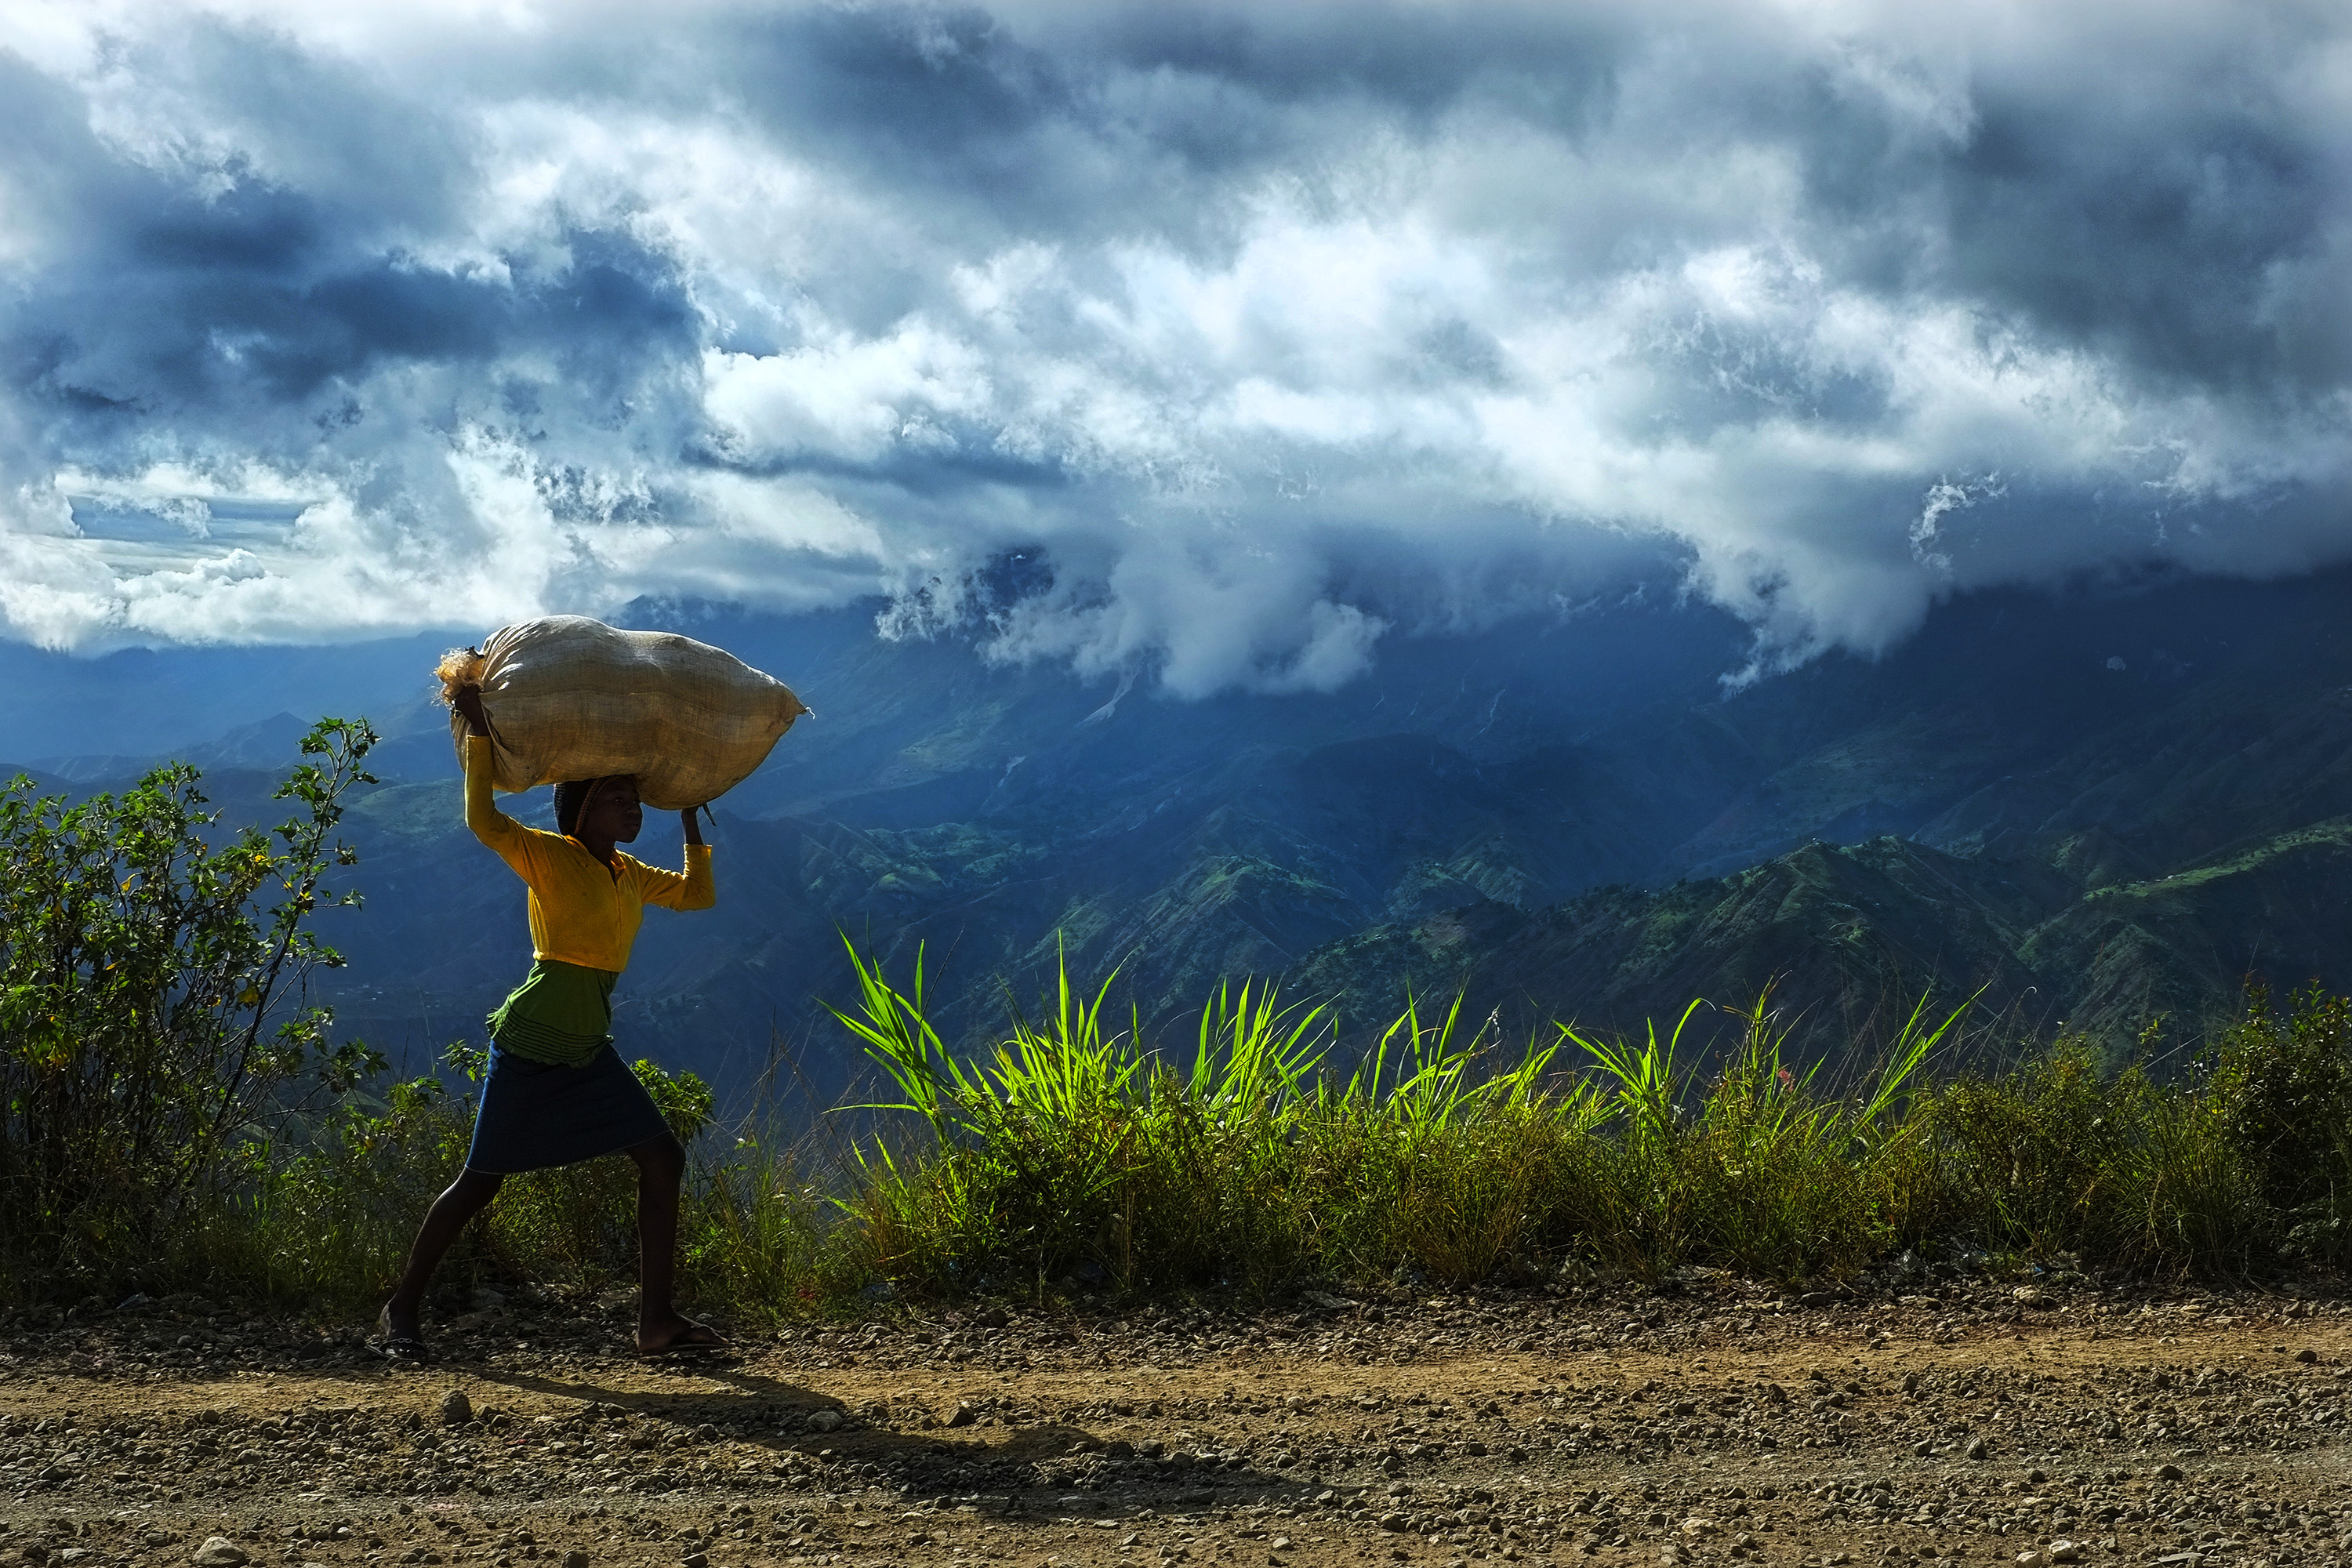 Child carrying a bag in Haiti countryside